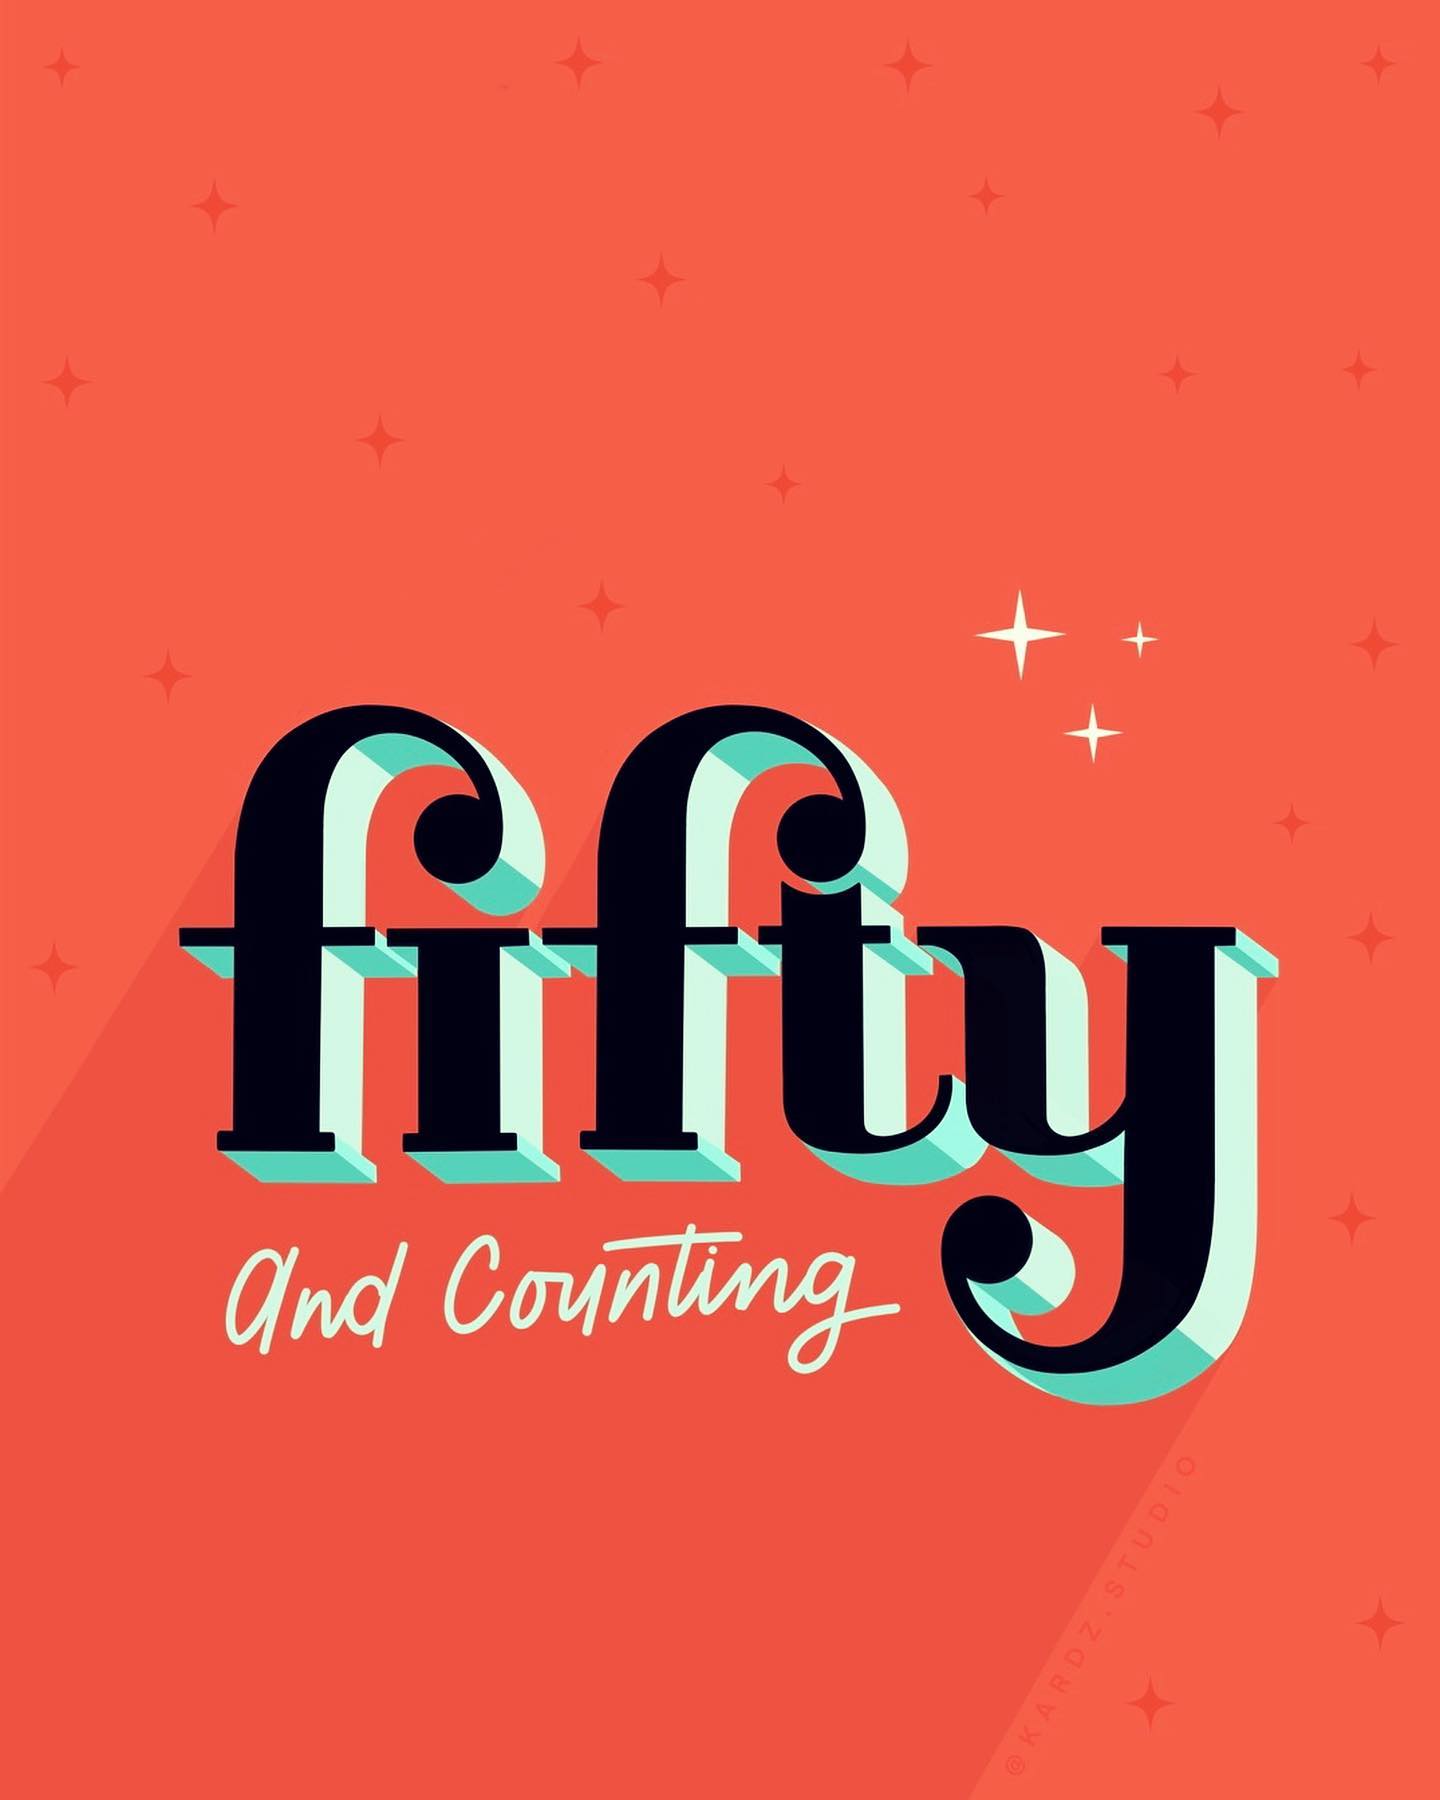 I chose "Fifty" for “Ligature Style” for a reason - I'll be turning 50 next month and it's been on my mind a lot lately.